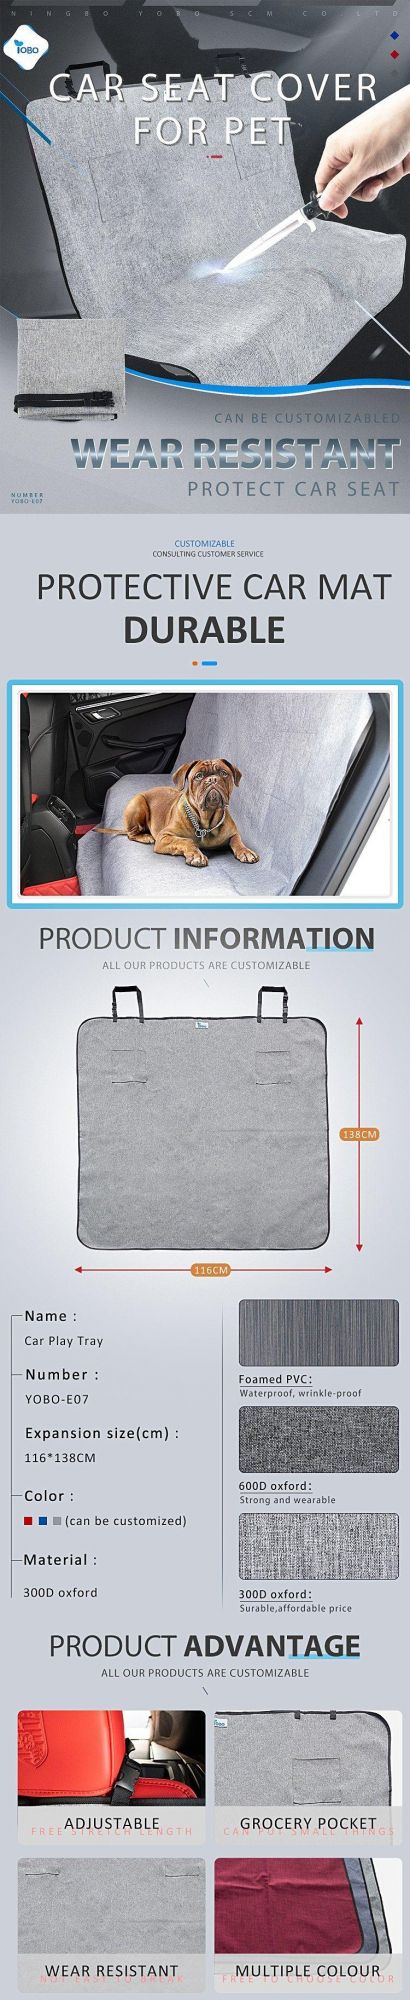 Pet Car Seat Cover Waterproof Scratch Proof Nonslip Backing Hammock Style Heavy Duty Back Seat Protector for Cars Trucks and SUV